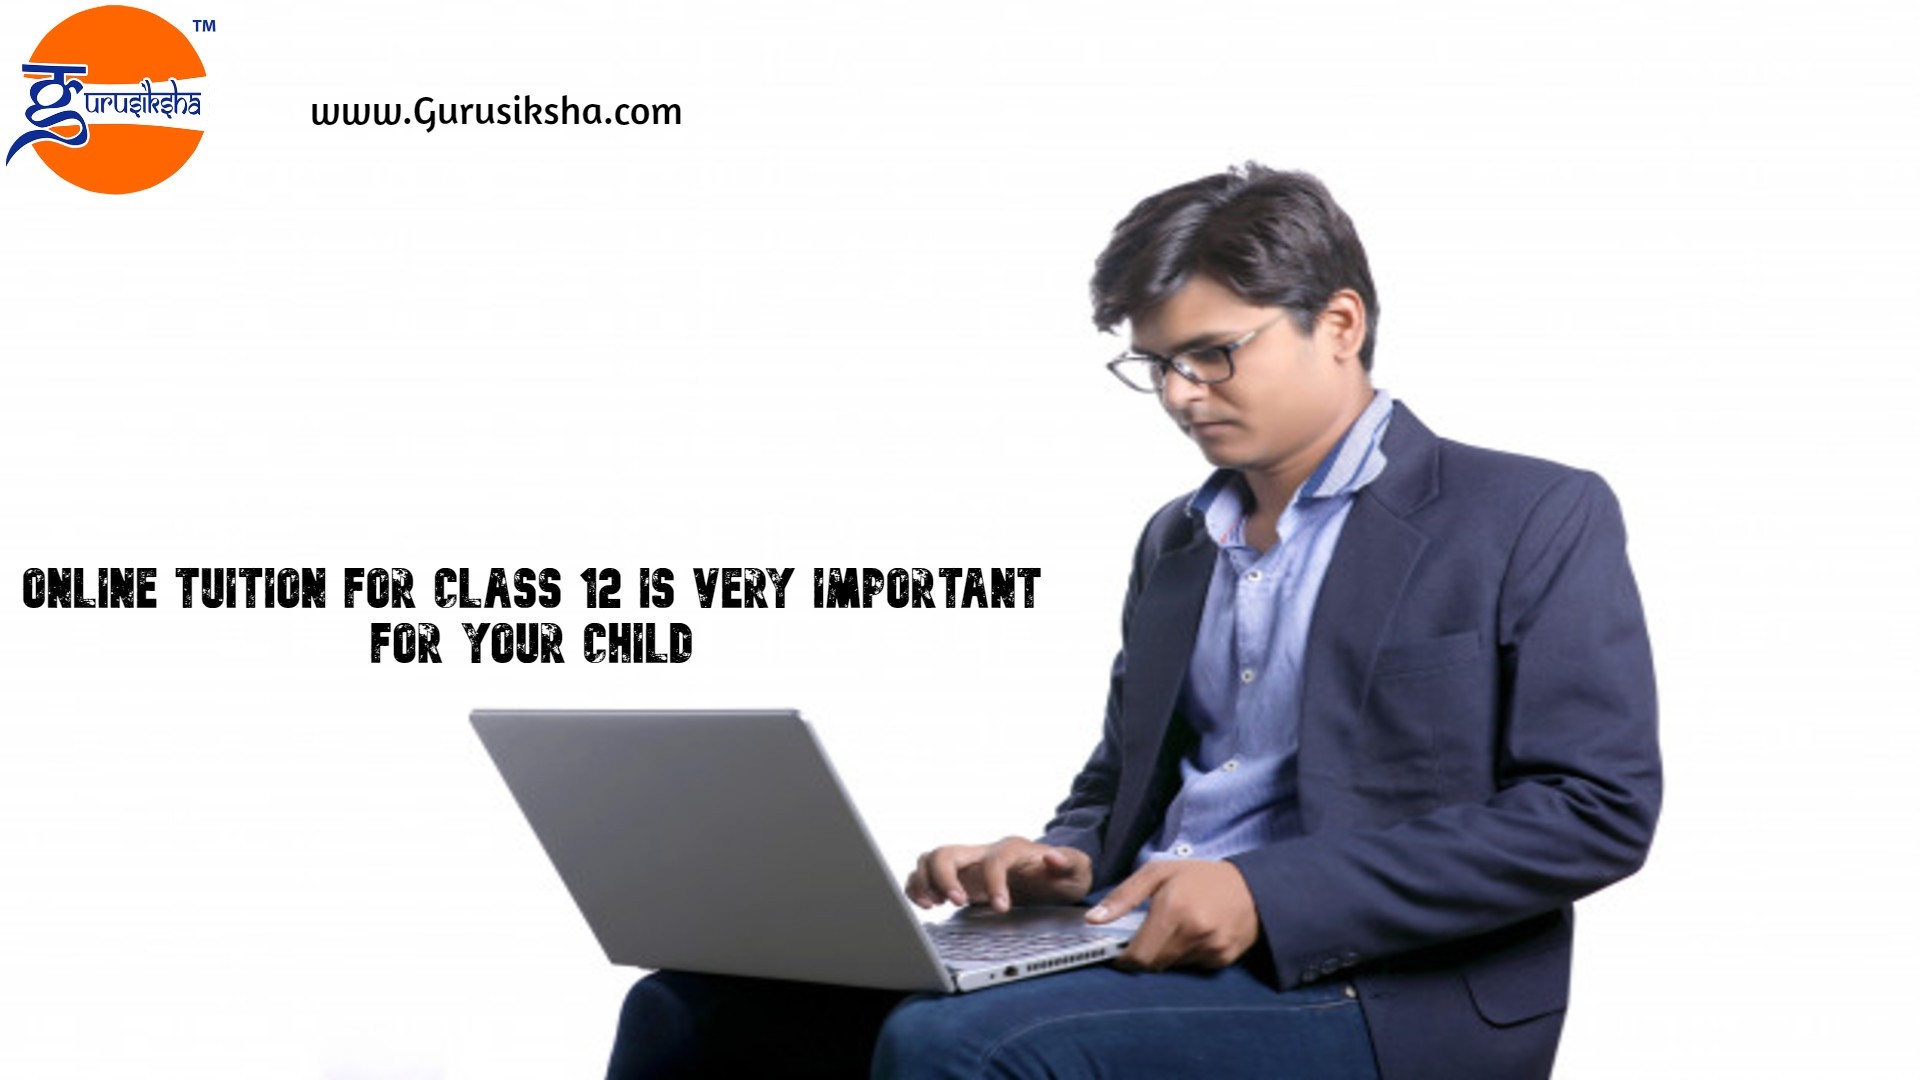 Online Tuition For Class 12 Is Very Important For Your Child